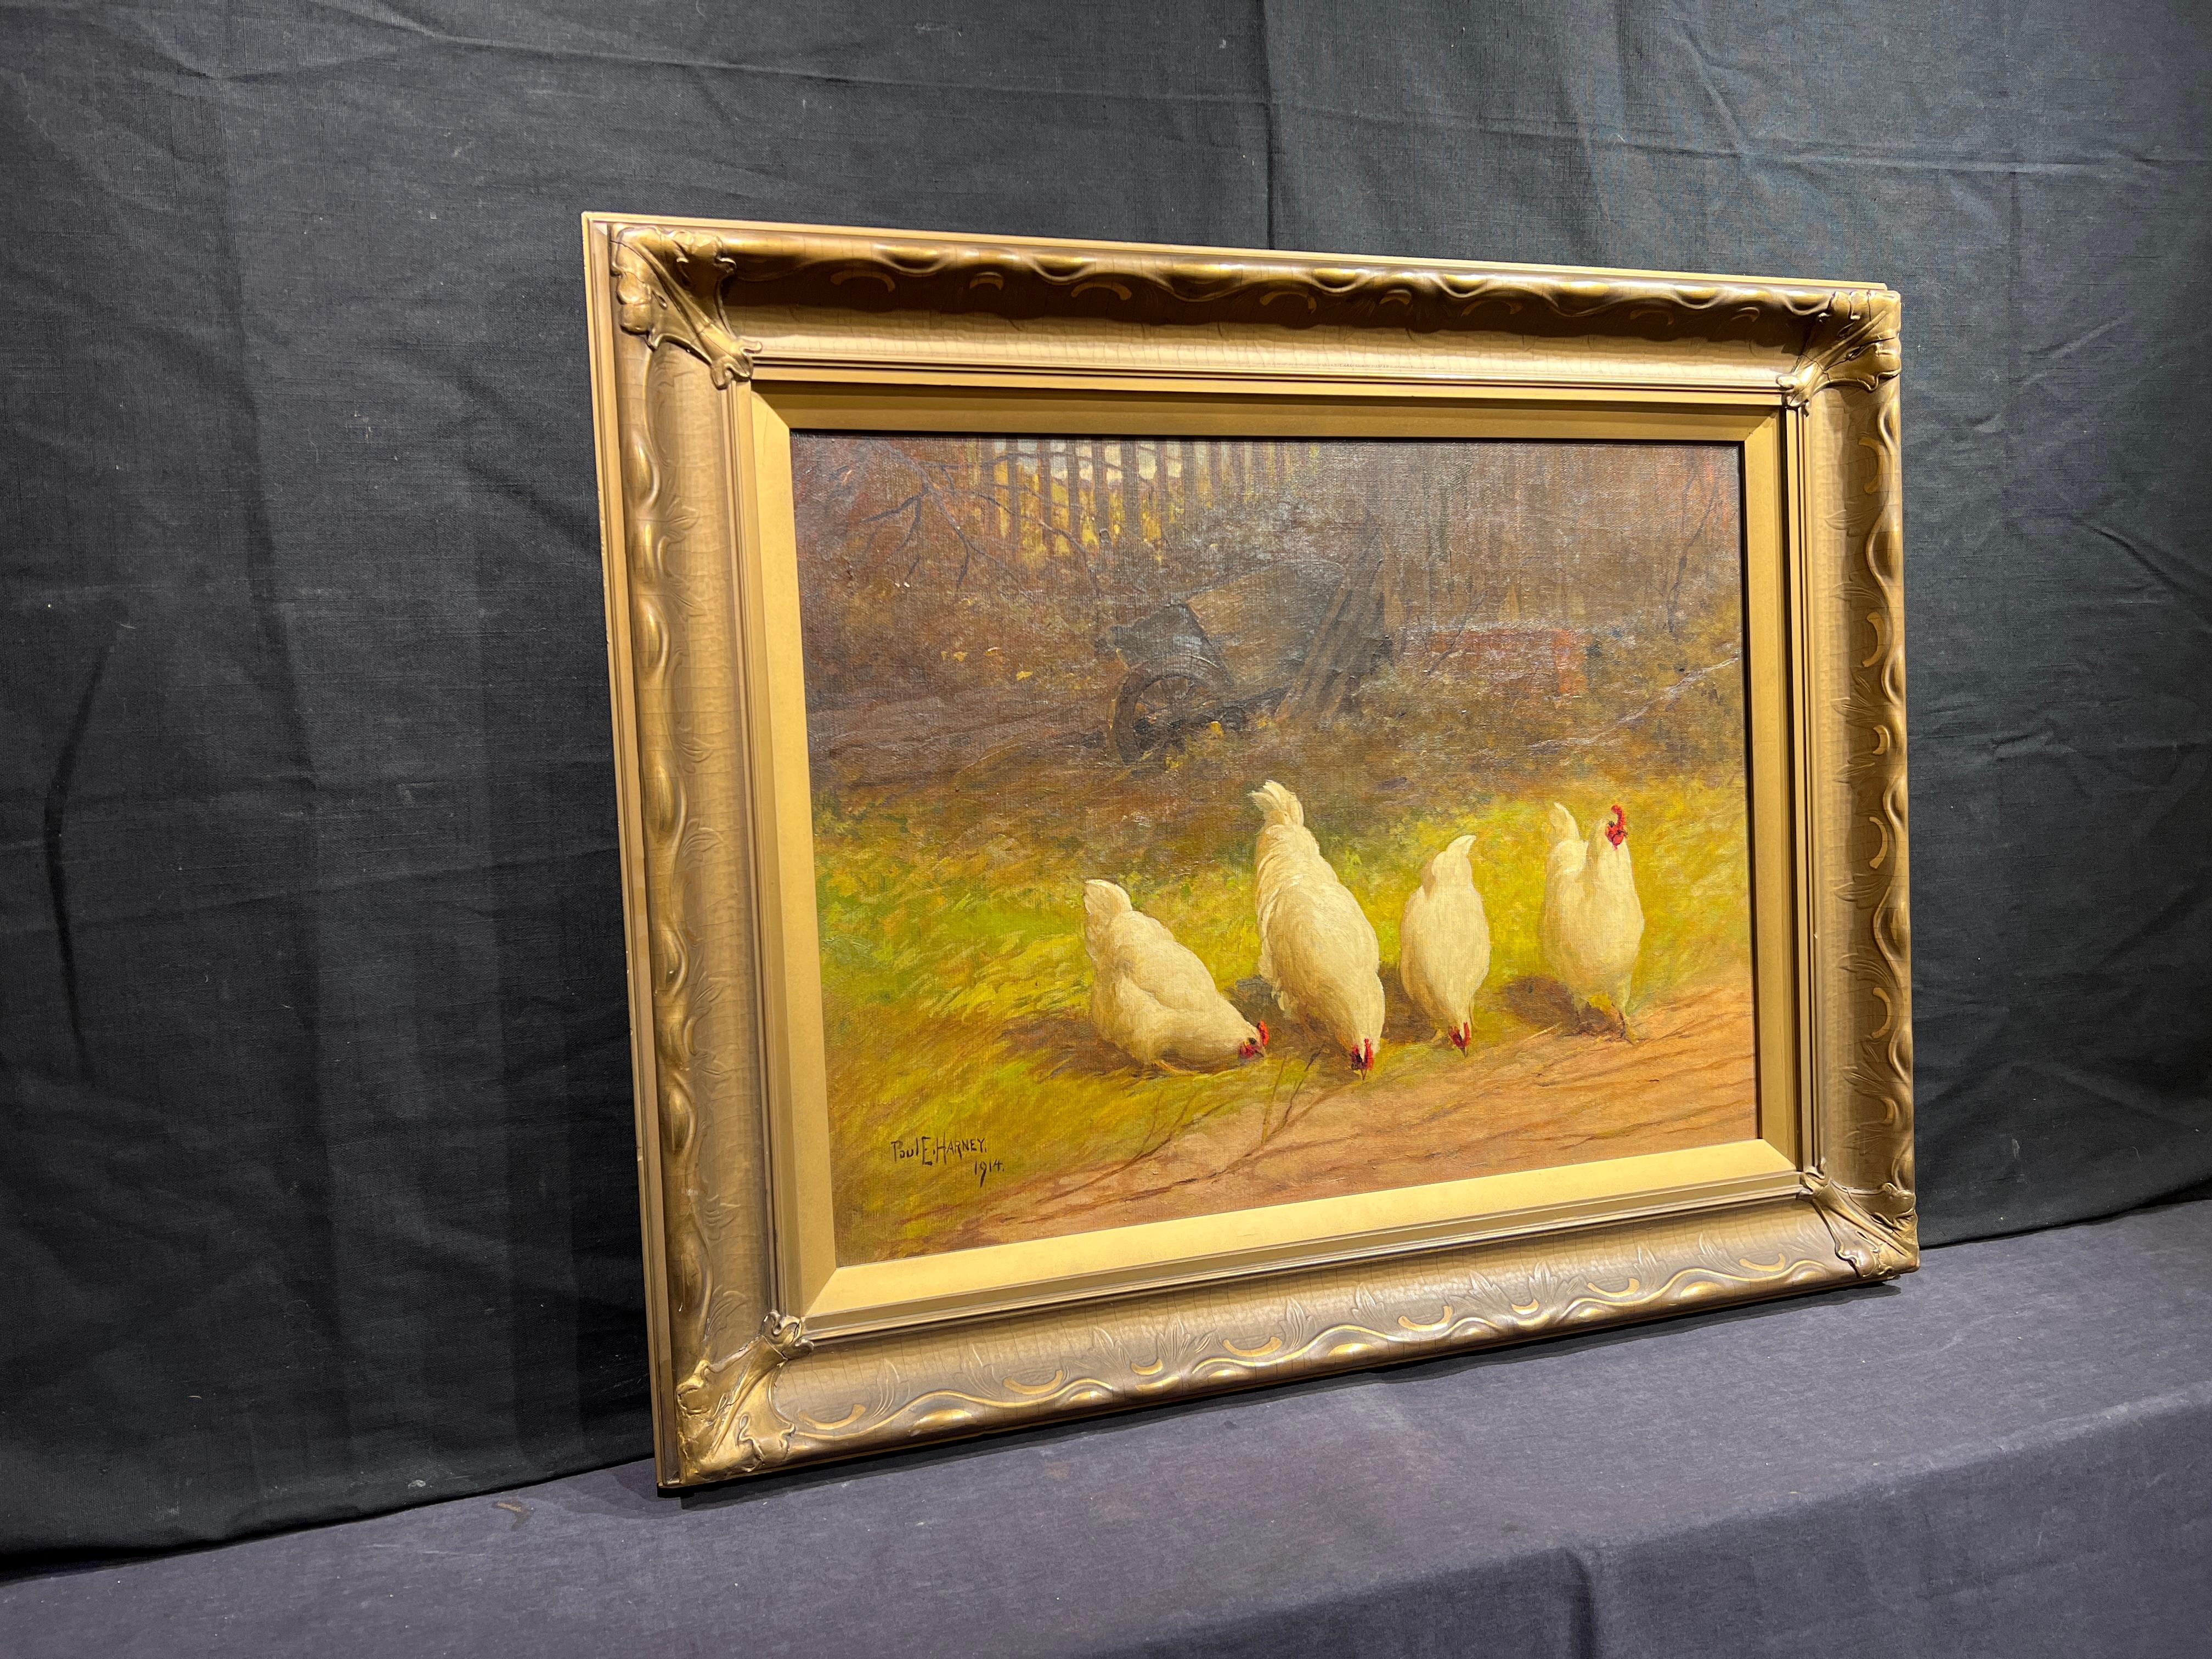 Four White Hens, 1914
By. Paul Harney (American, 1850-1915)
Signed and Dated Lower Left
Unframed: 18